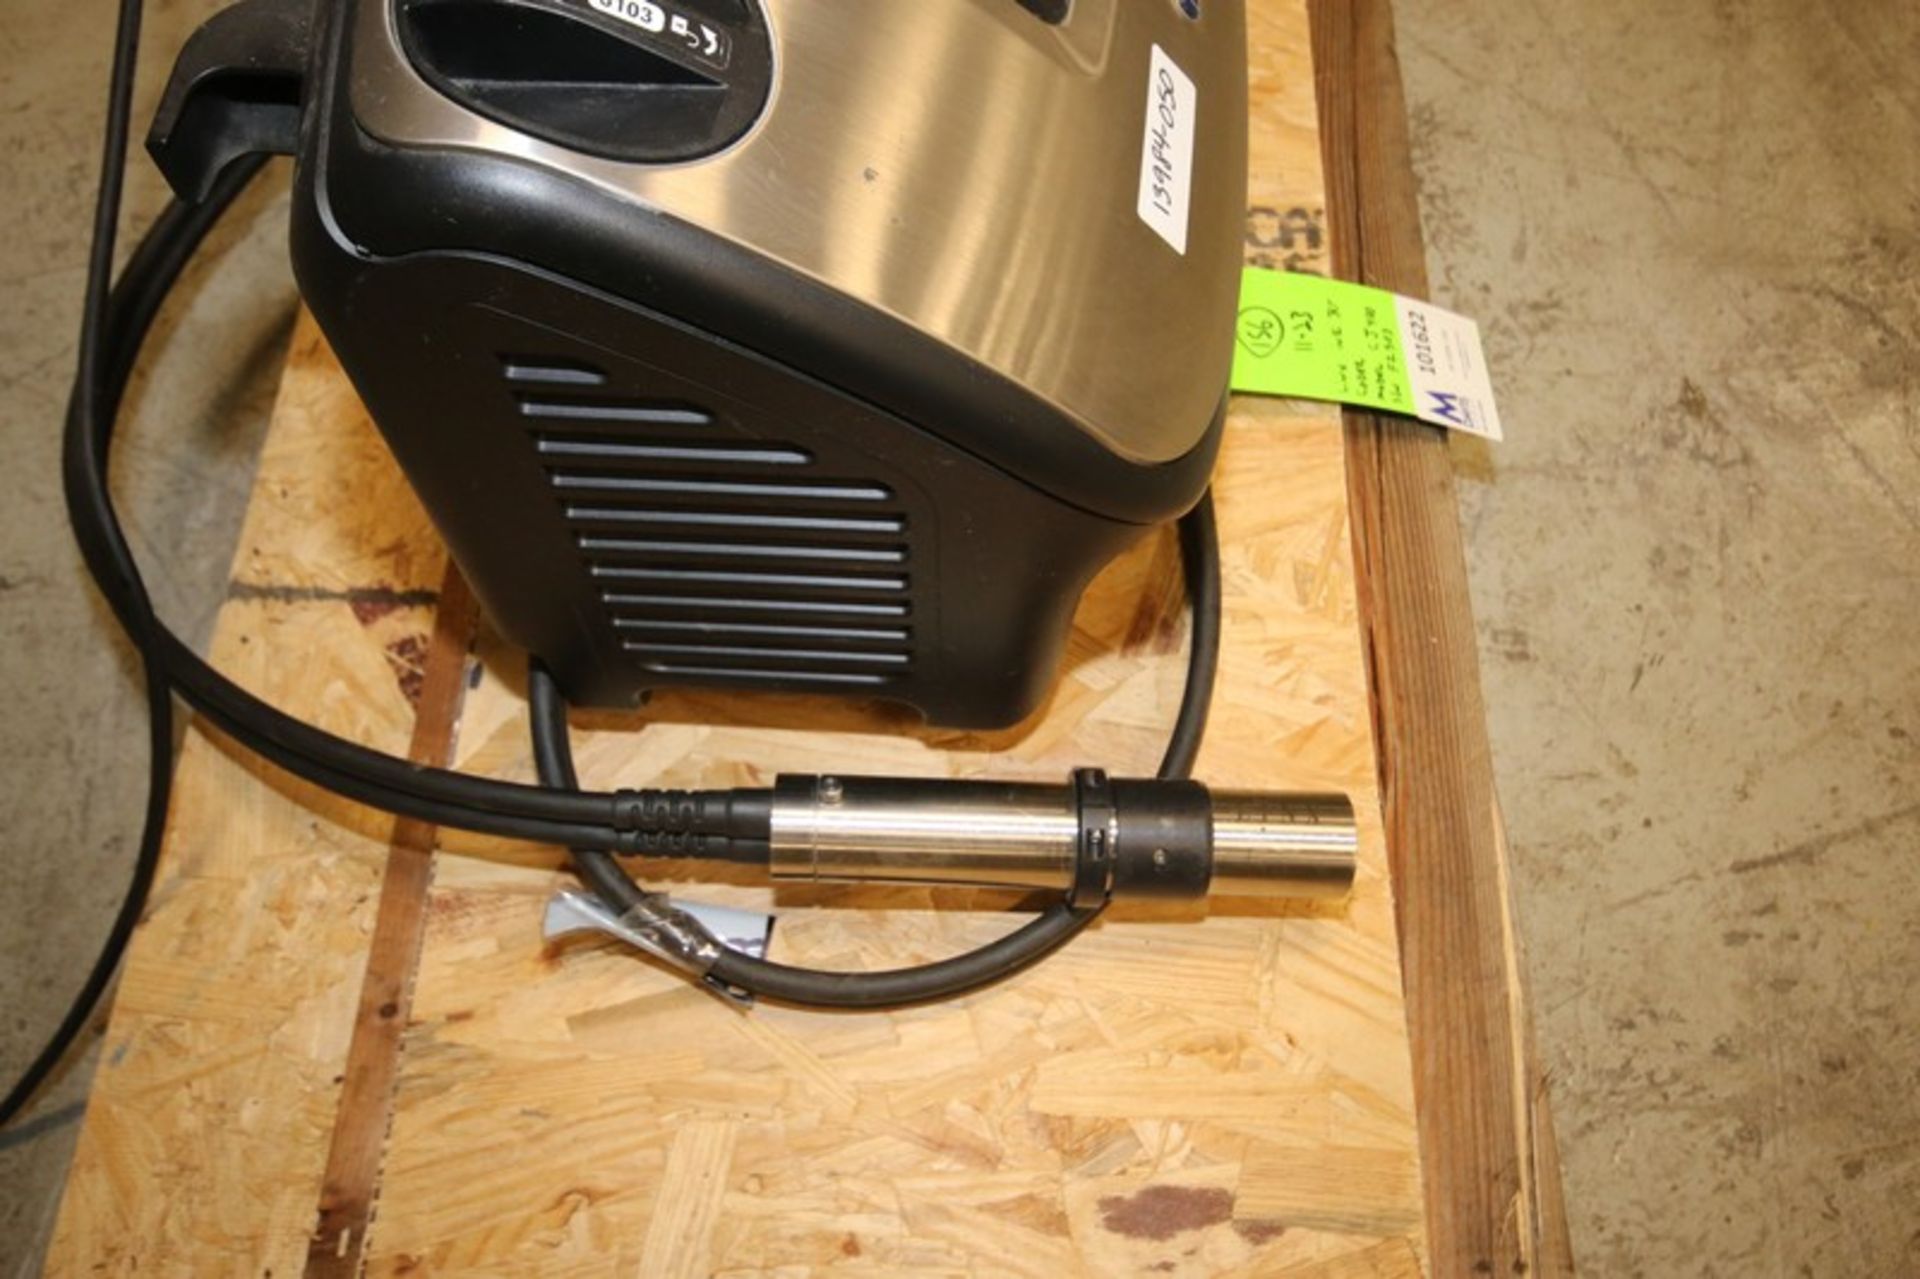 Linx Ink Jet Coder, Model CJ400, SN FZ503, with (1) Head (INV#101622 (Located @ the MDG Auction - Image 3 of 5